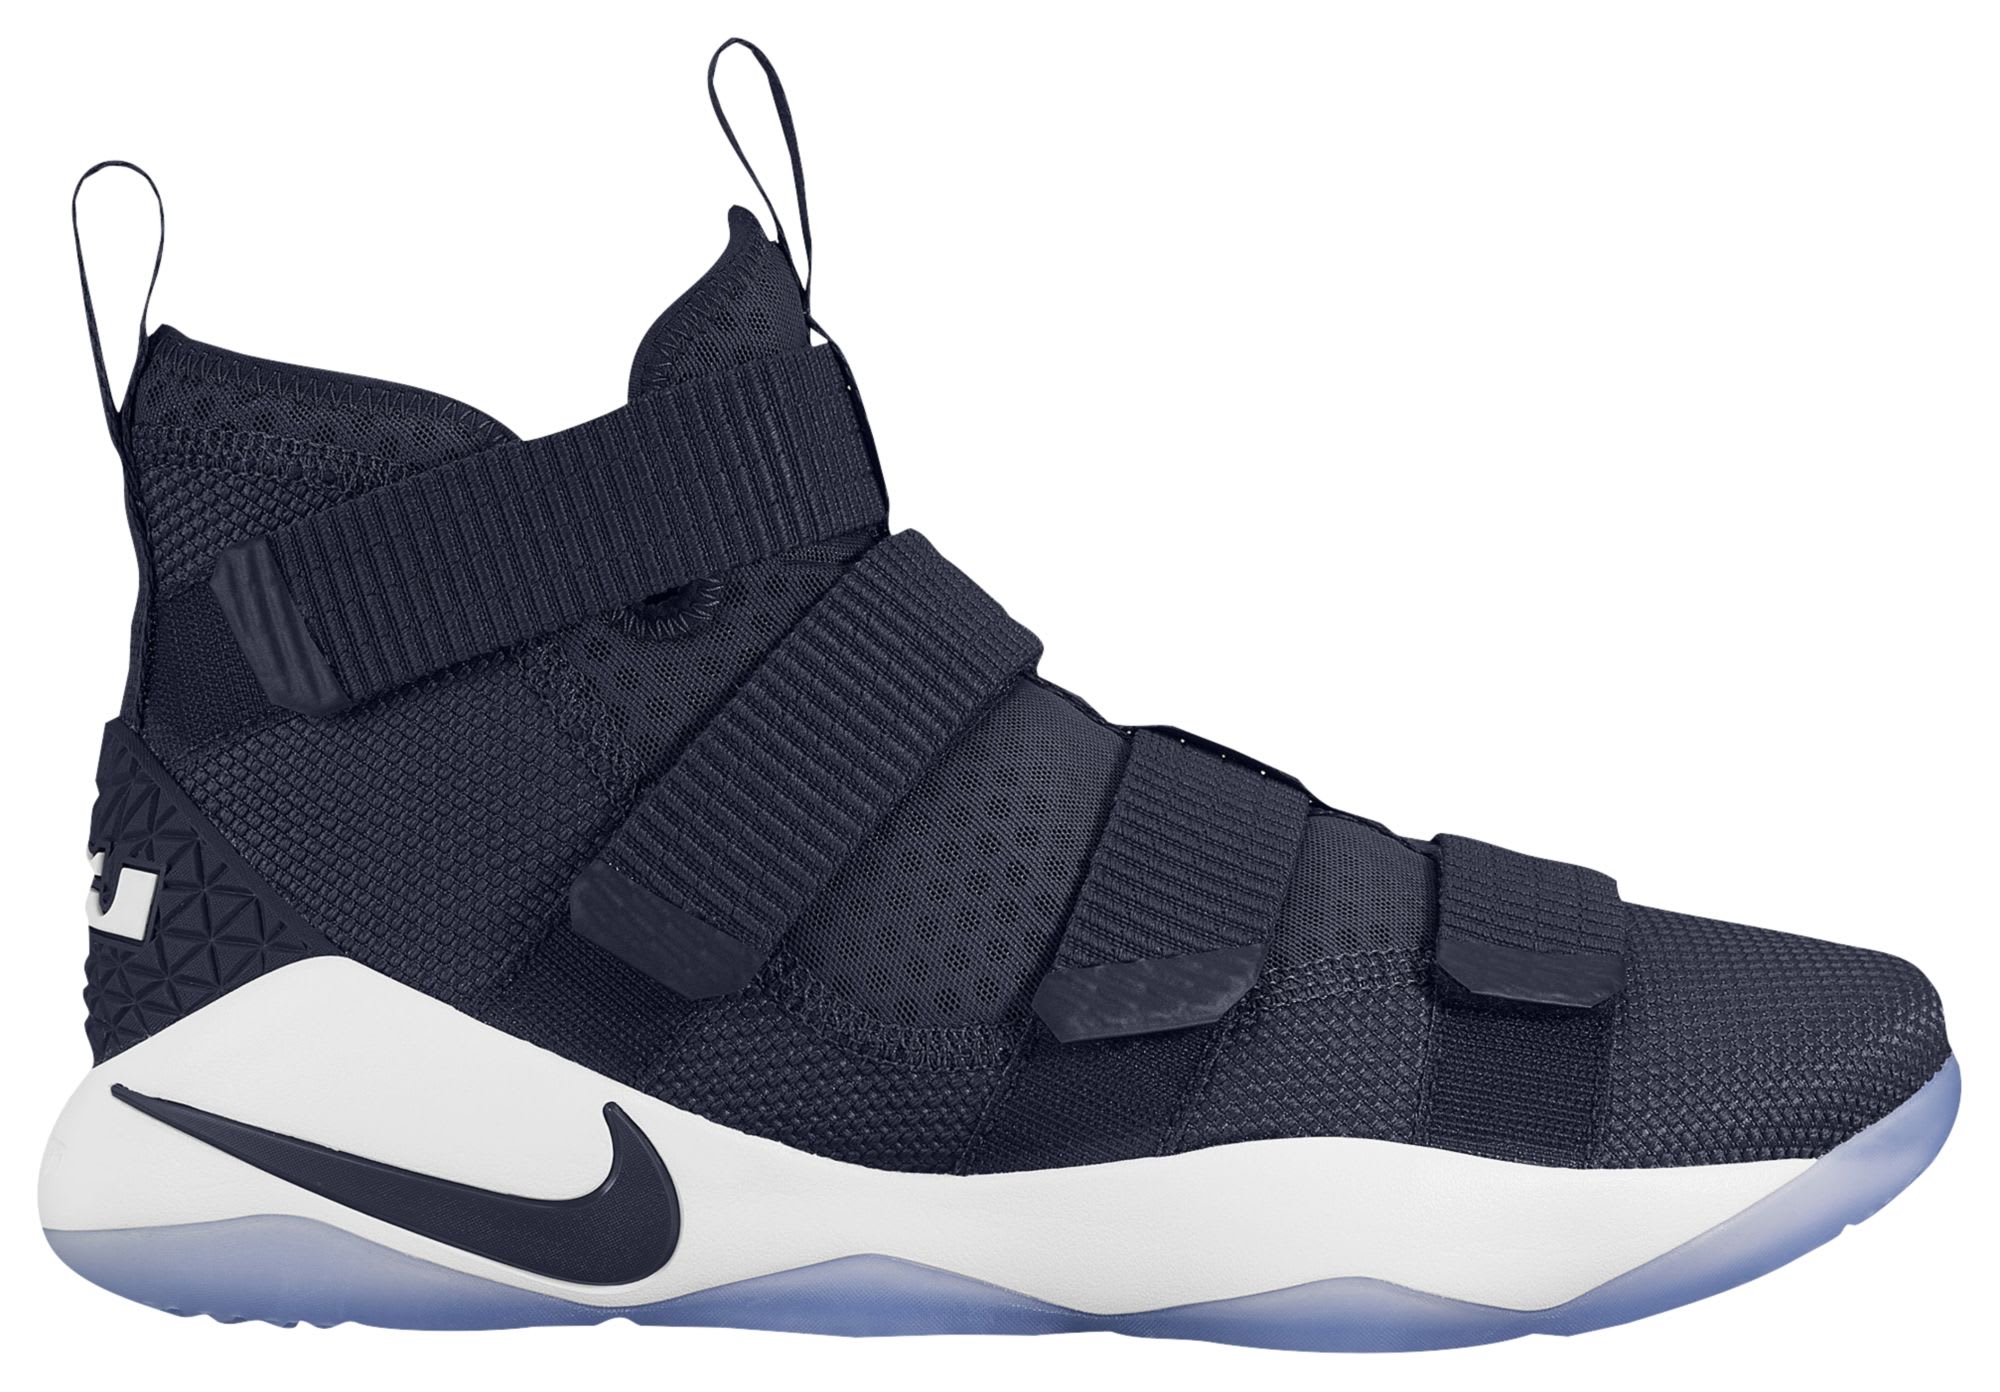 Nike LeBron Soldier 11 TB College Navy